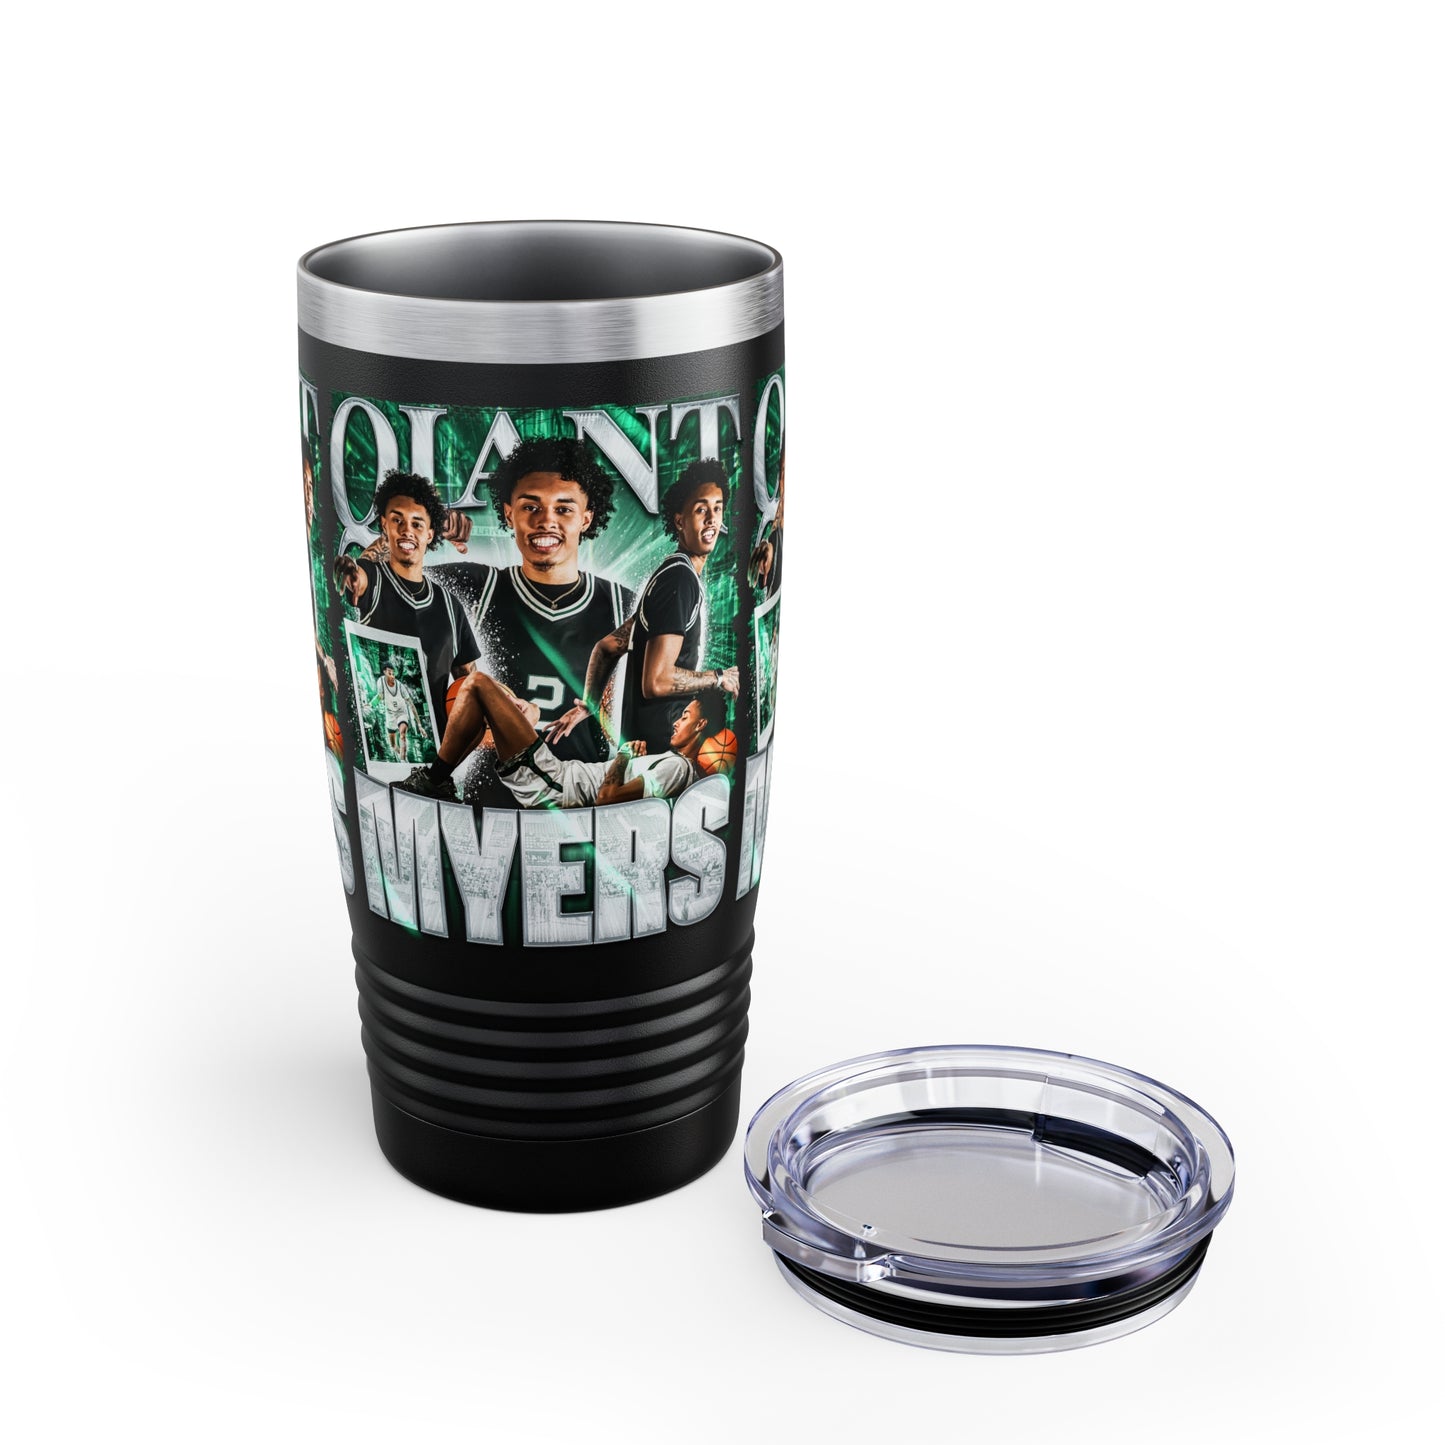 QIANT MYERS STAINLESS STEEL TUMBLER